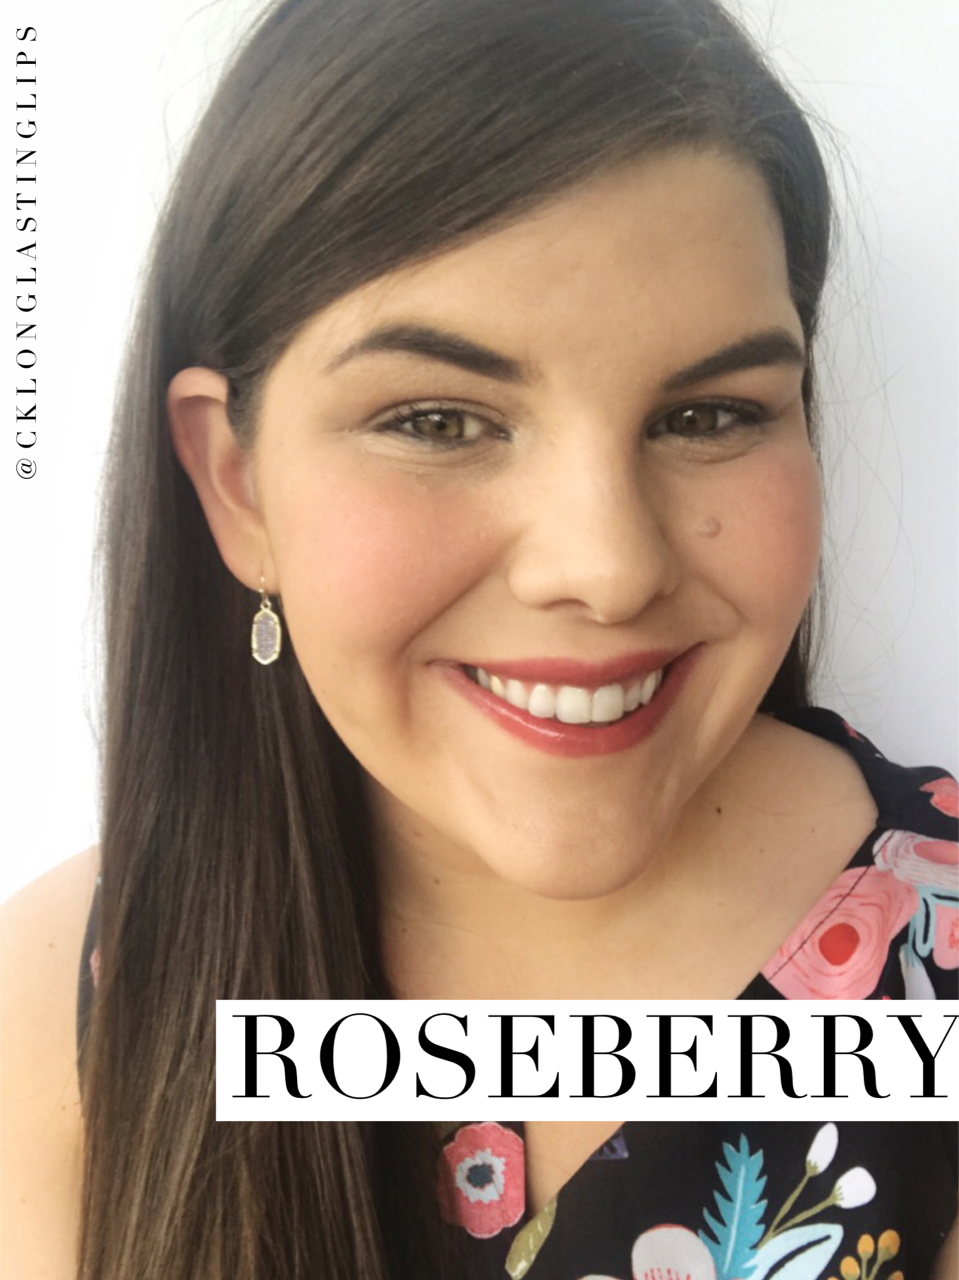  Roseberry LipSense - I love this long lasting lipstick. Water-proof, smudge proof &amp; kiss proof www.carleykelley.com 